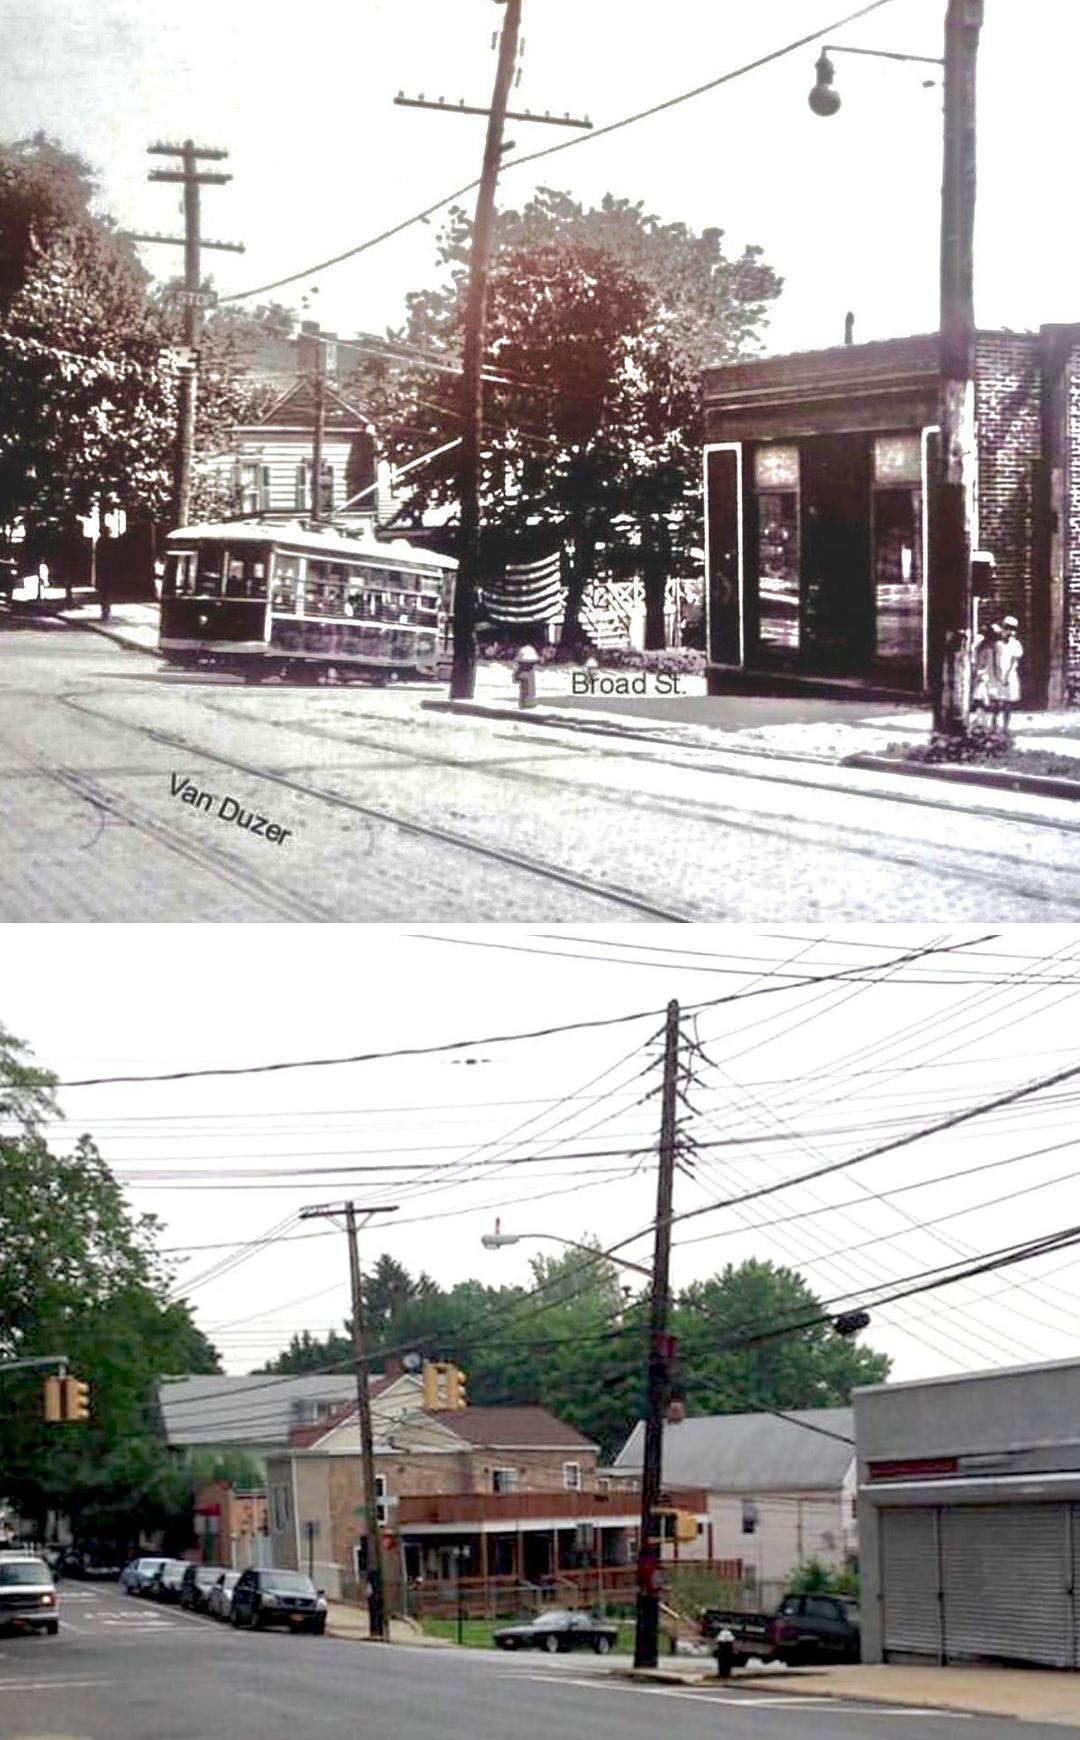 Van Duzer And Broad Streets, Stapleton Captured In Both 1927 And 2014.